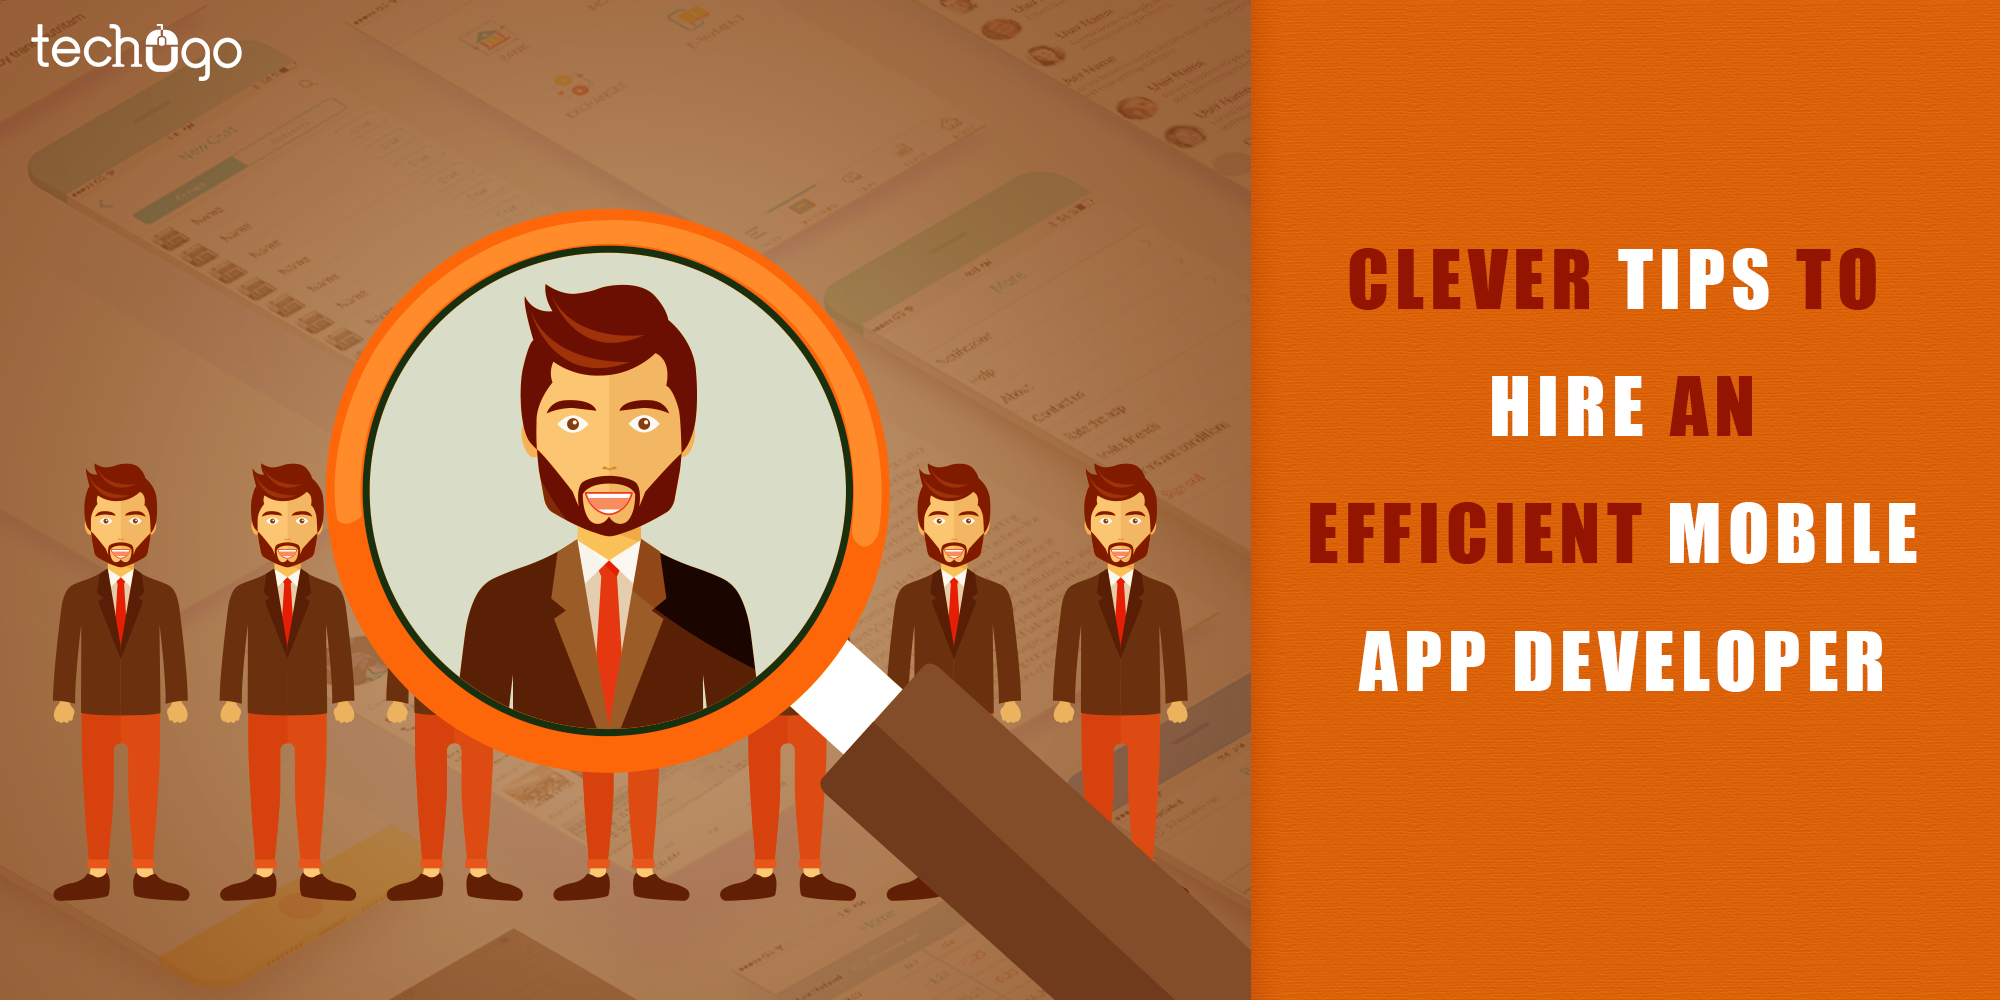 Clever Tips To Hire An Efficient Mobile App Developer